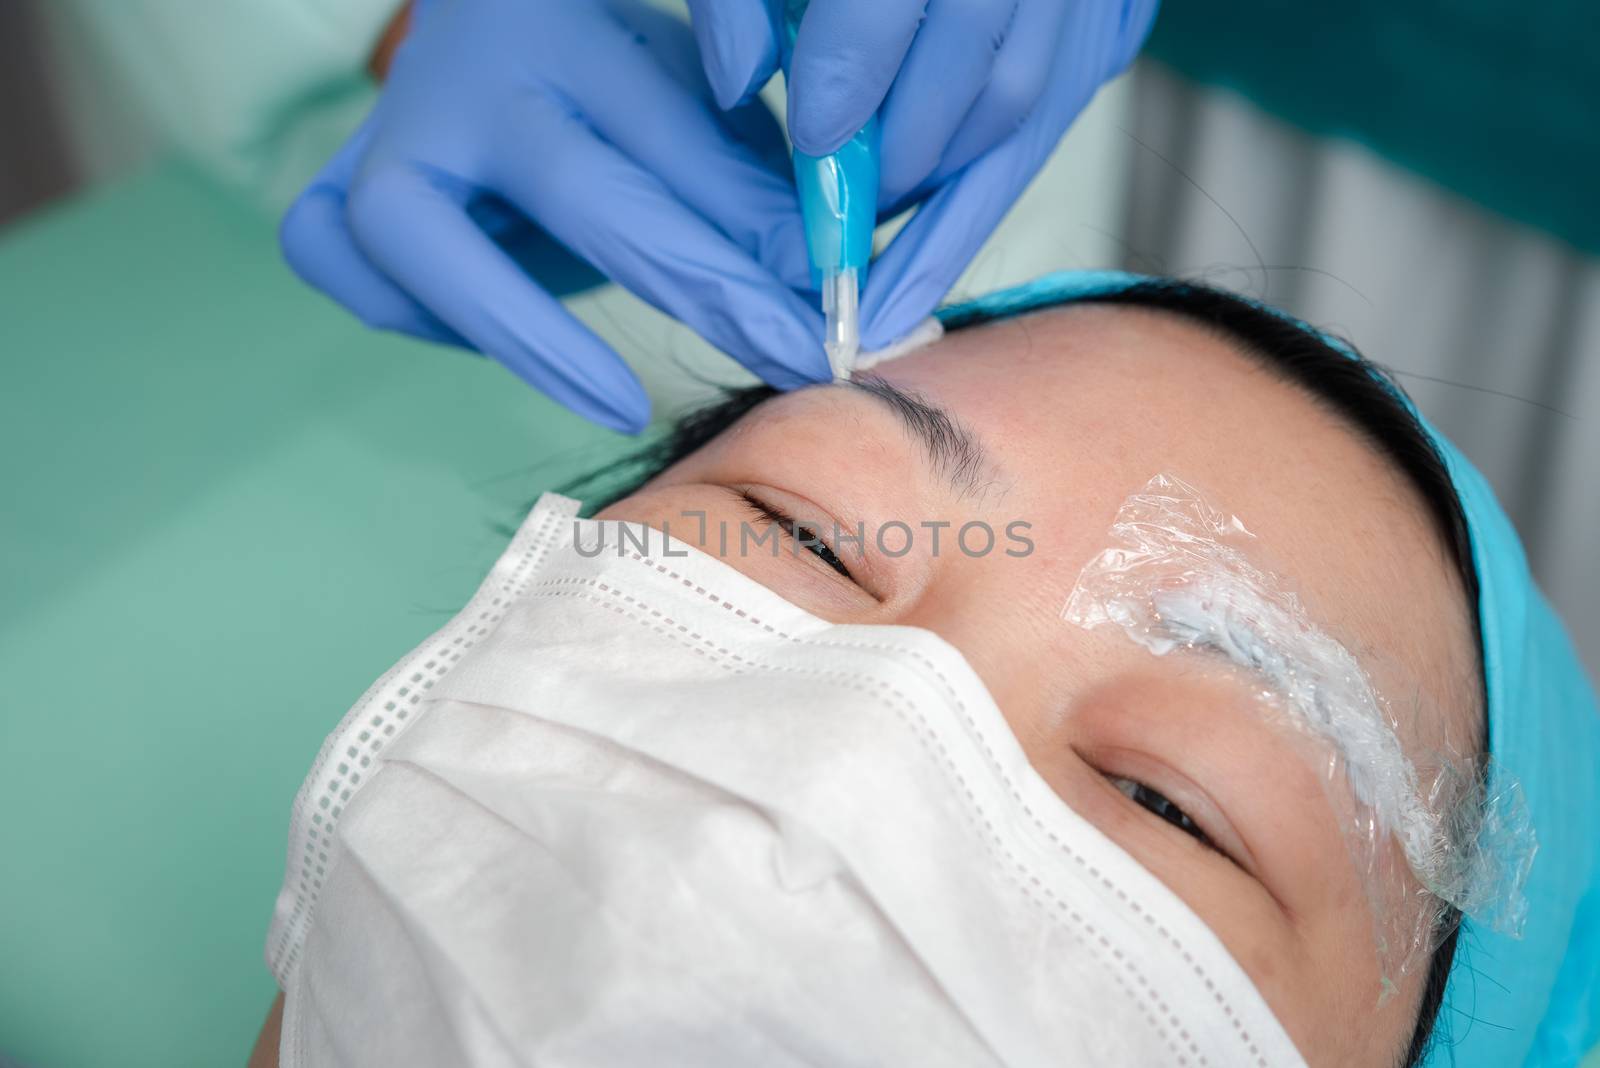 Asian woman eyebrow tattooing by doctor specialist in Eyebrow tattoo clinic or Eyebrow embroidery clinic for tattoo or correction use COVID-19 prevention policy protect by use mask and face shield